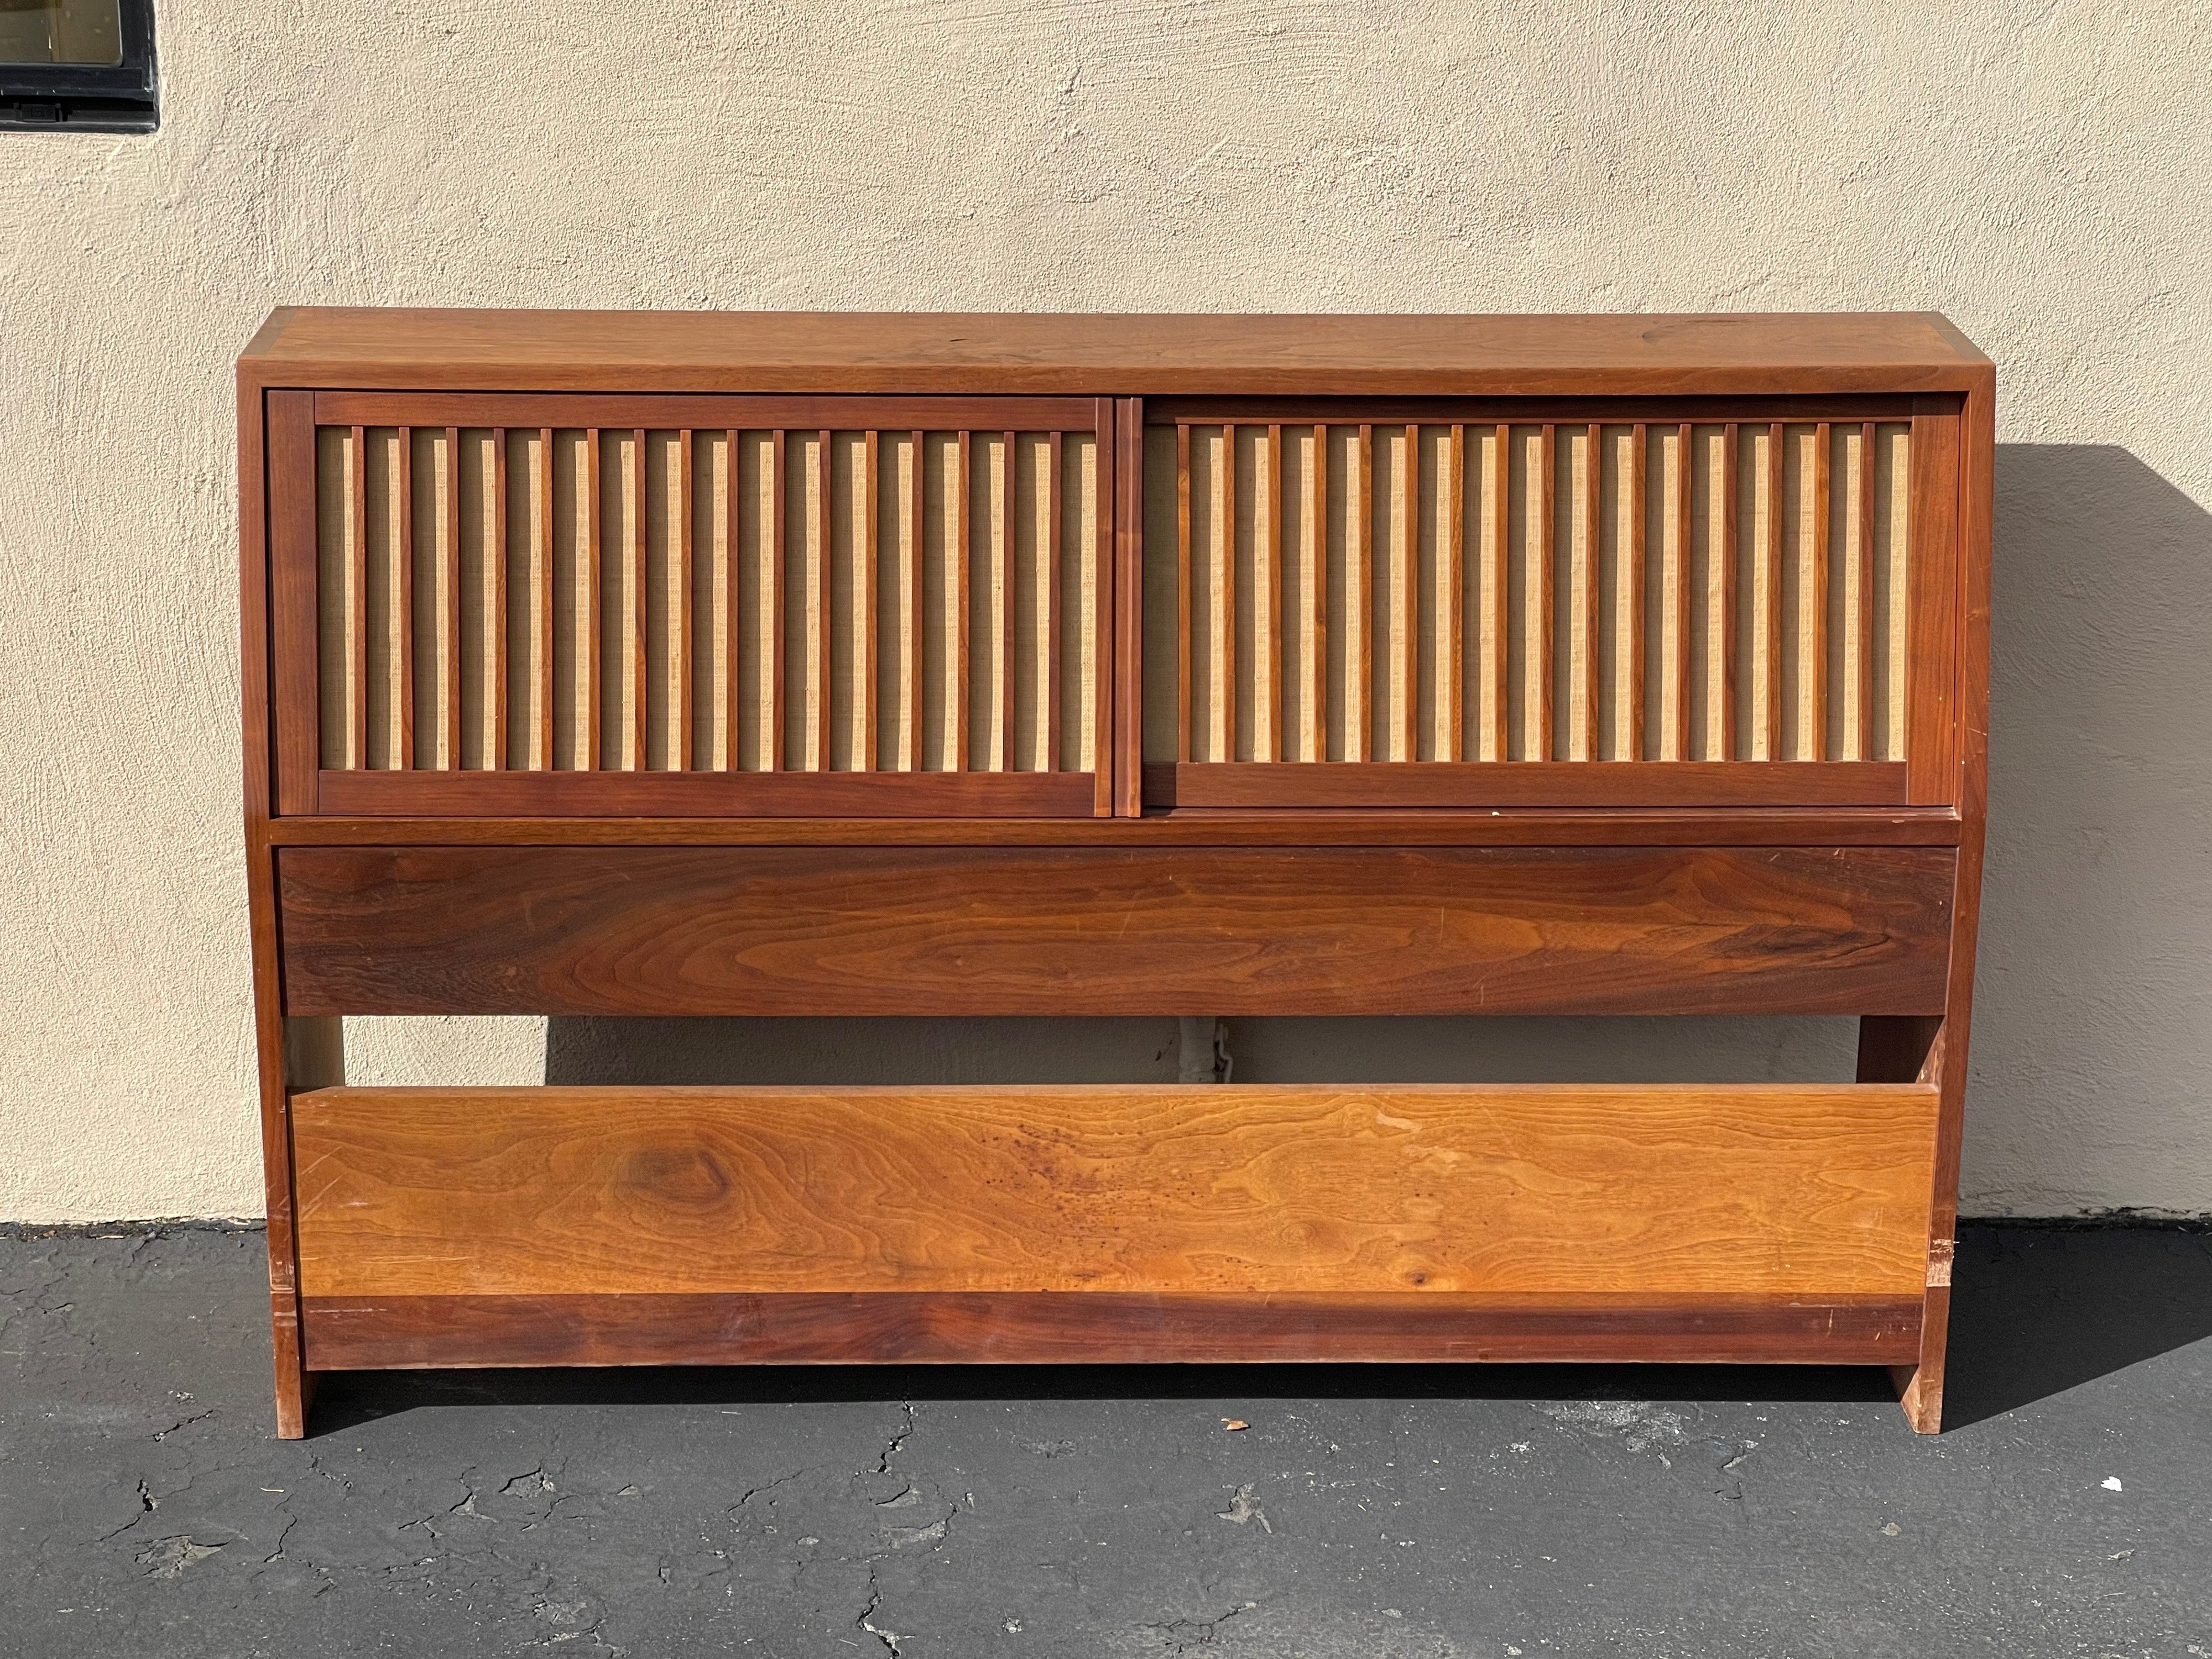 A striking handcrafted full size storage headboard in walnut by George Nakashima with paperwork, circa 1959. I will used Nakashima's own words as written on the receipt for further description of the piece: 